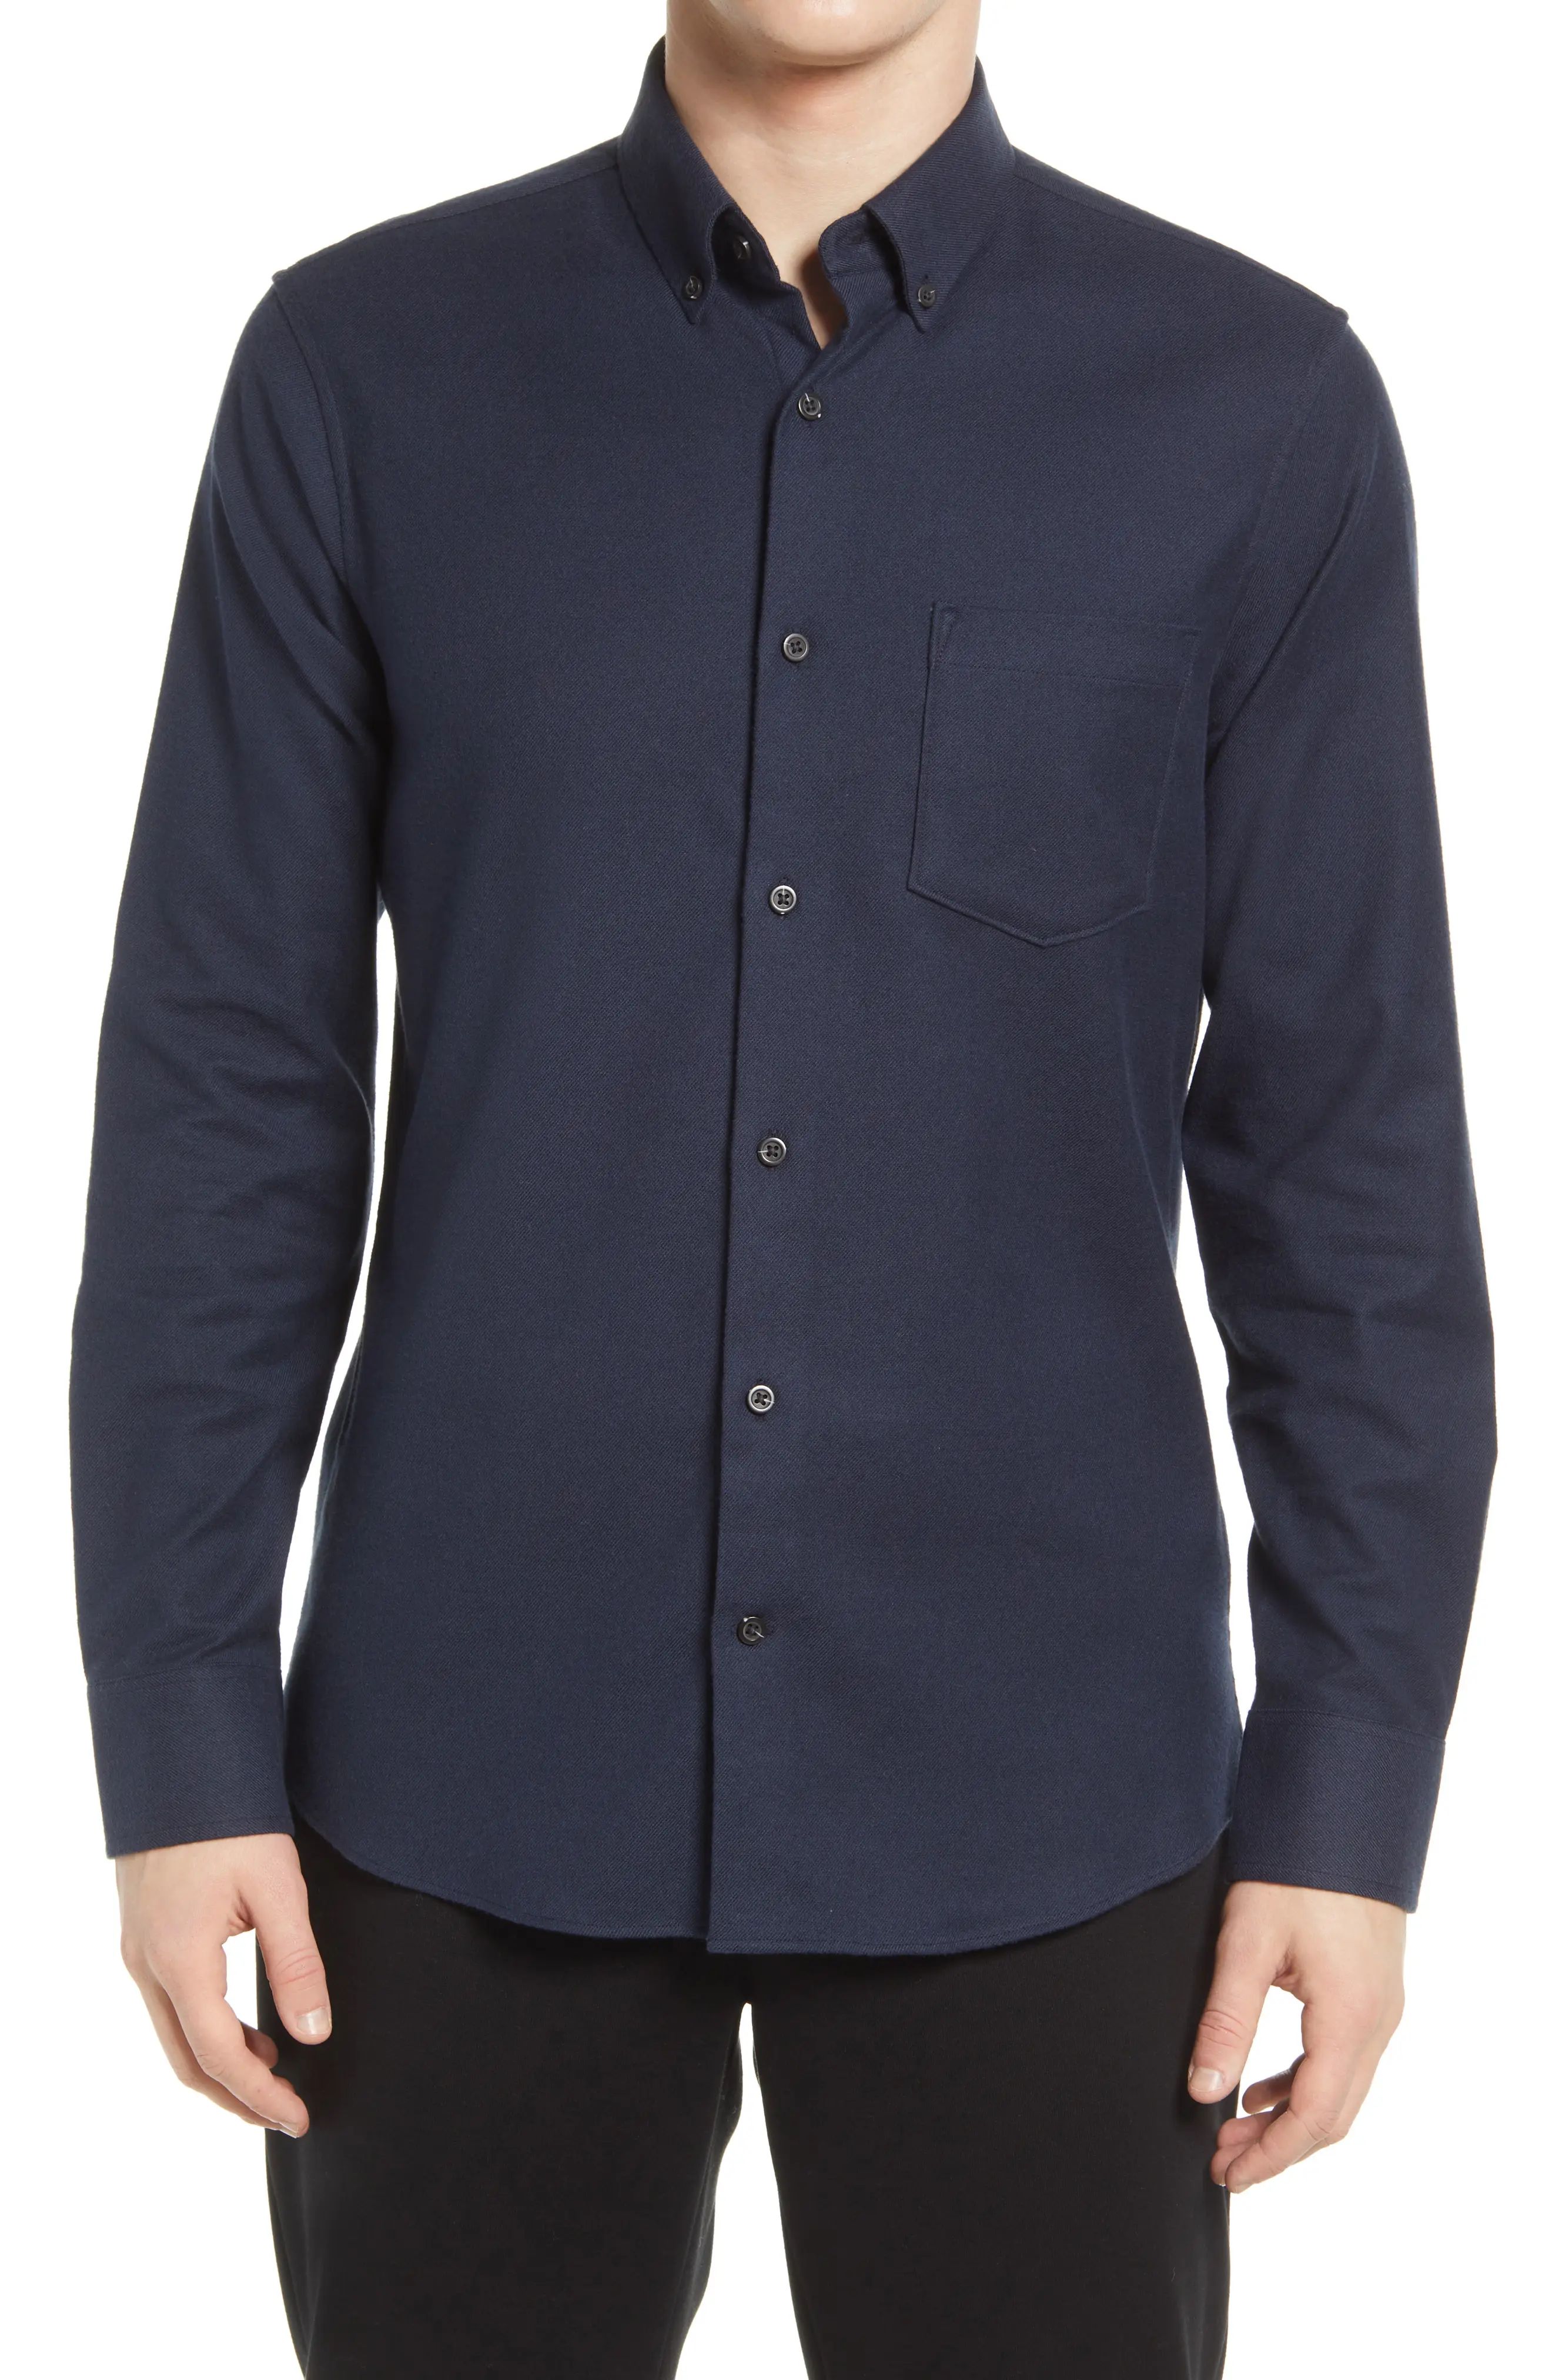 Nordstrom Tech-Smart Button-Down T-Shirt in Navy Blazer Ts Grindle at Nordstrom, Size Xx-Large | Nordstrom